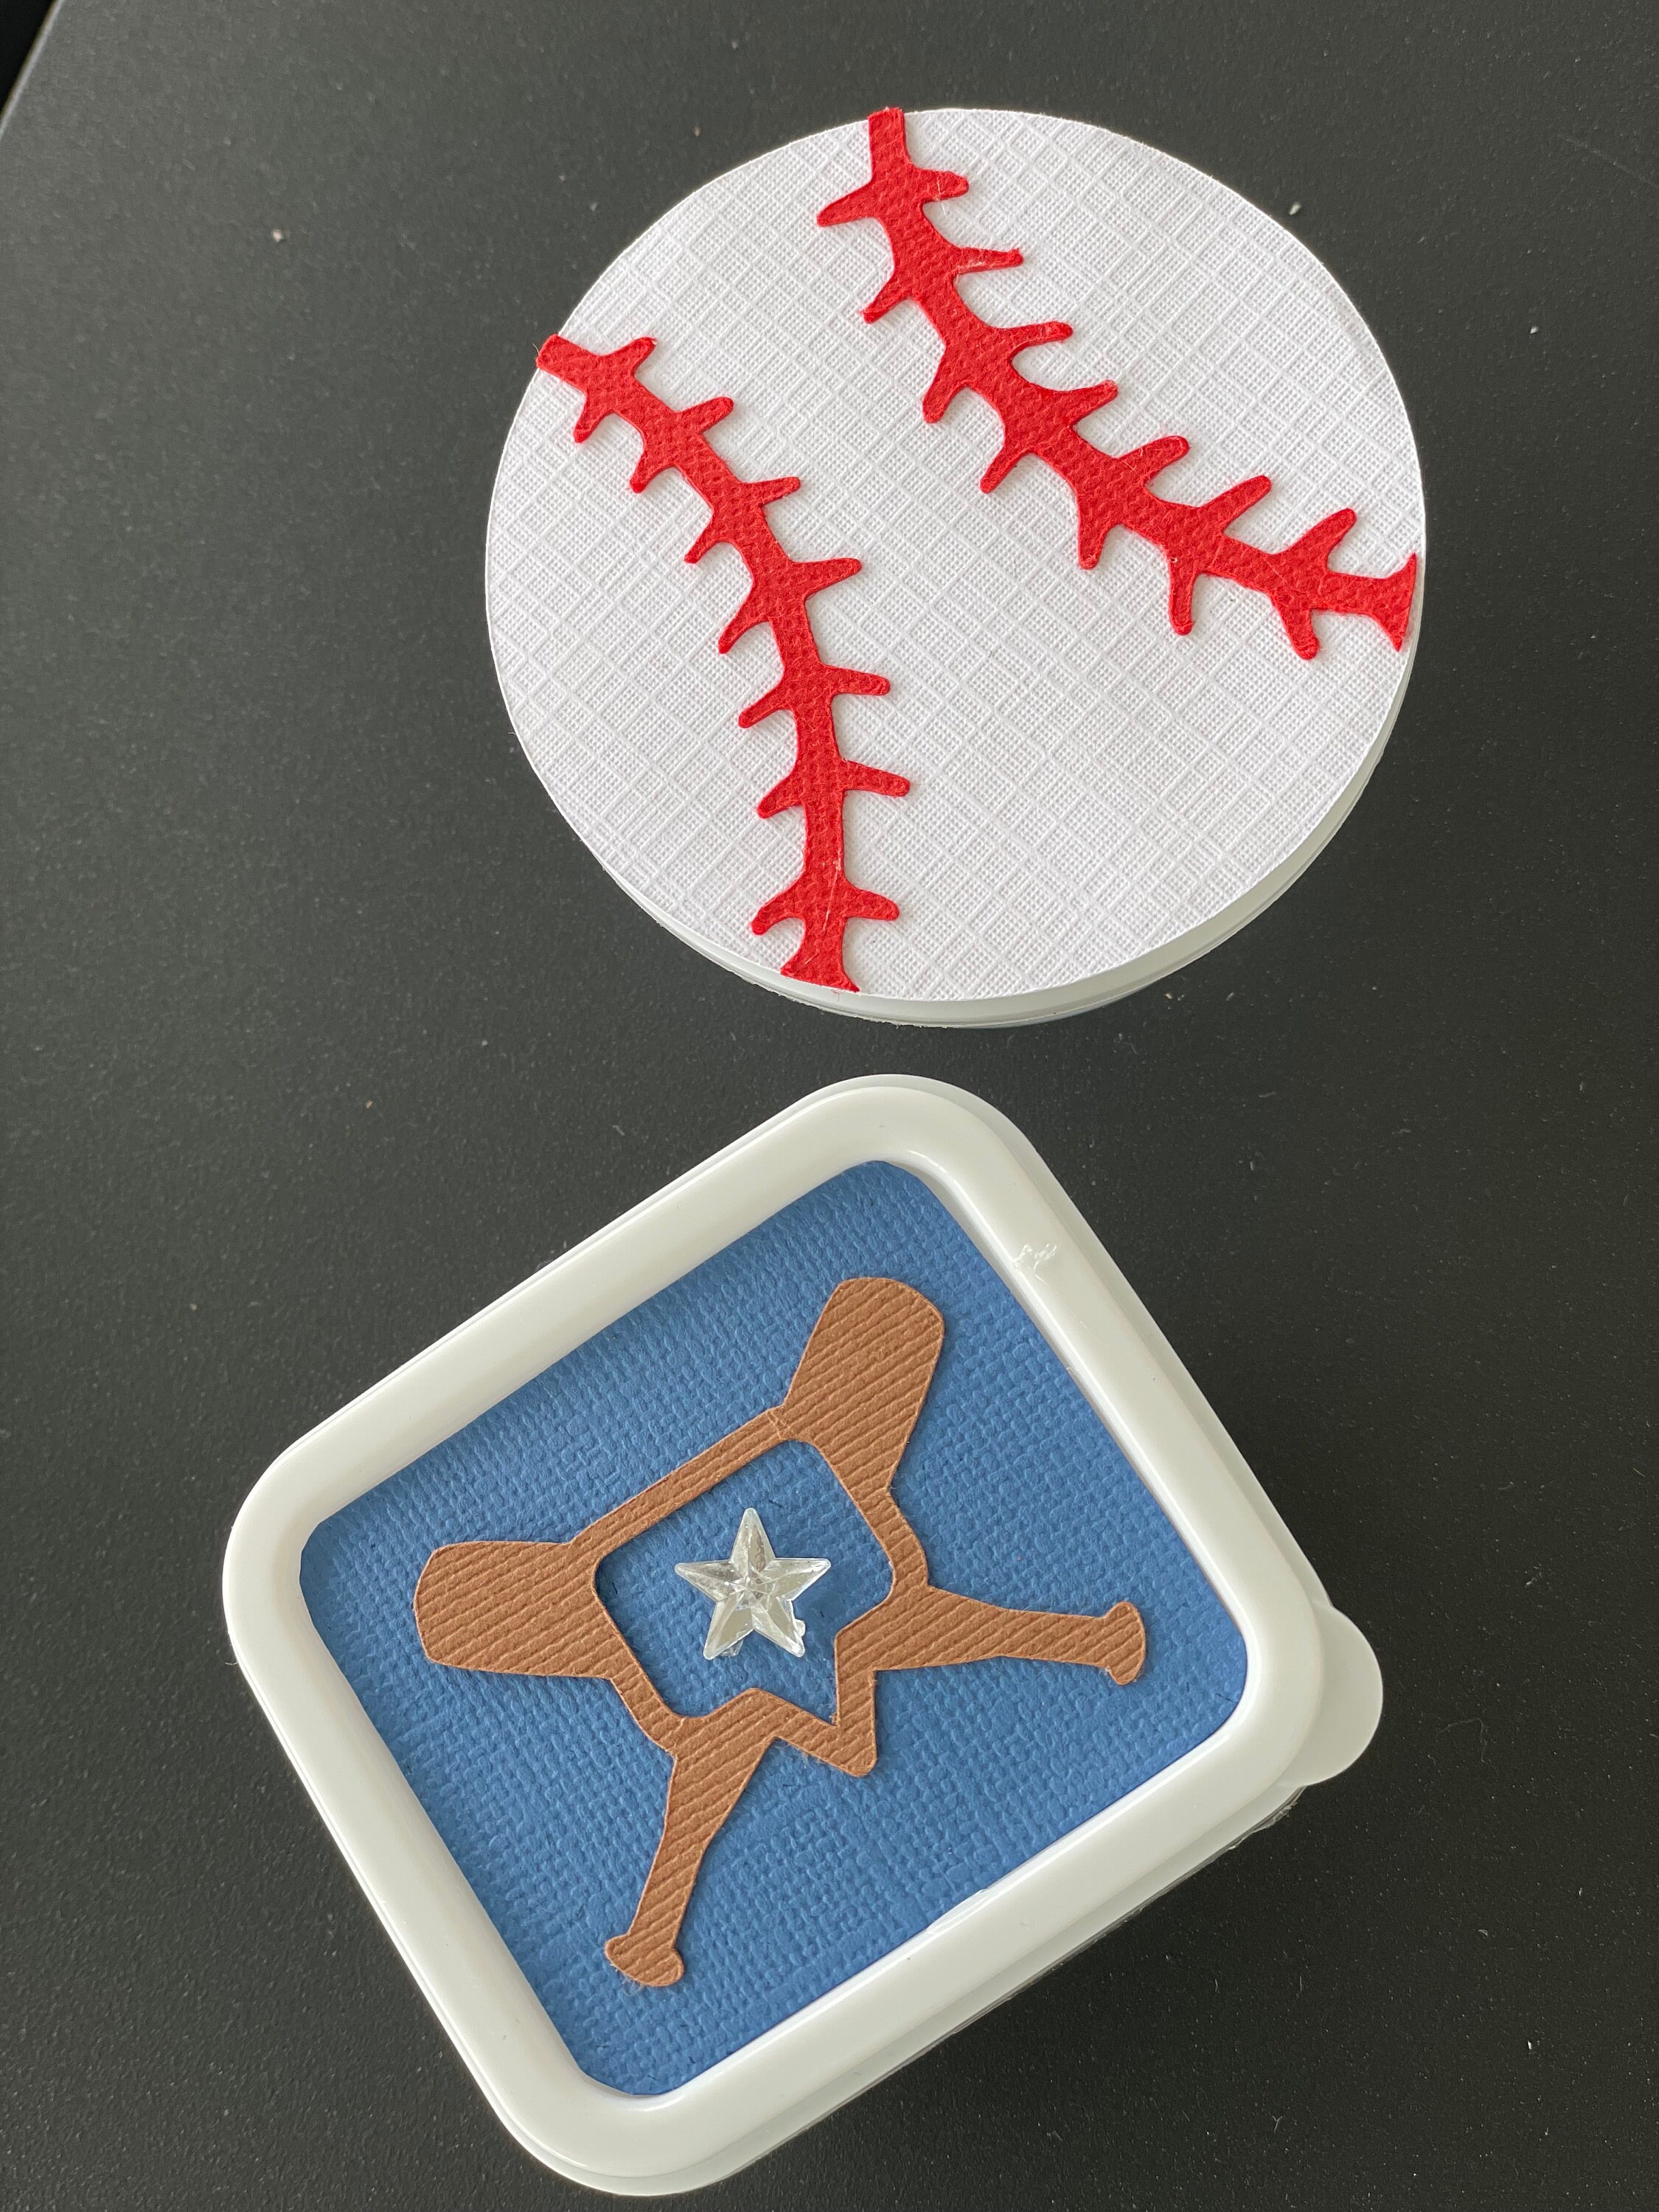 Lot of 10 Personalized Baseball Mini Containers Party Favors